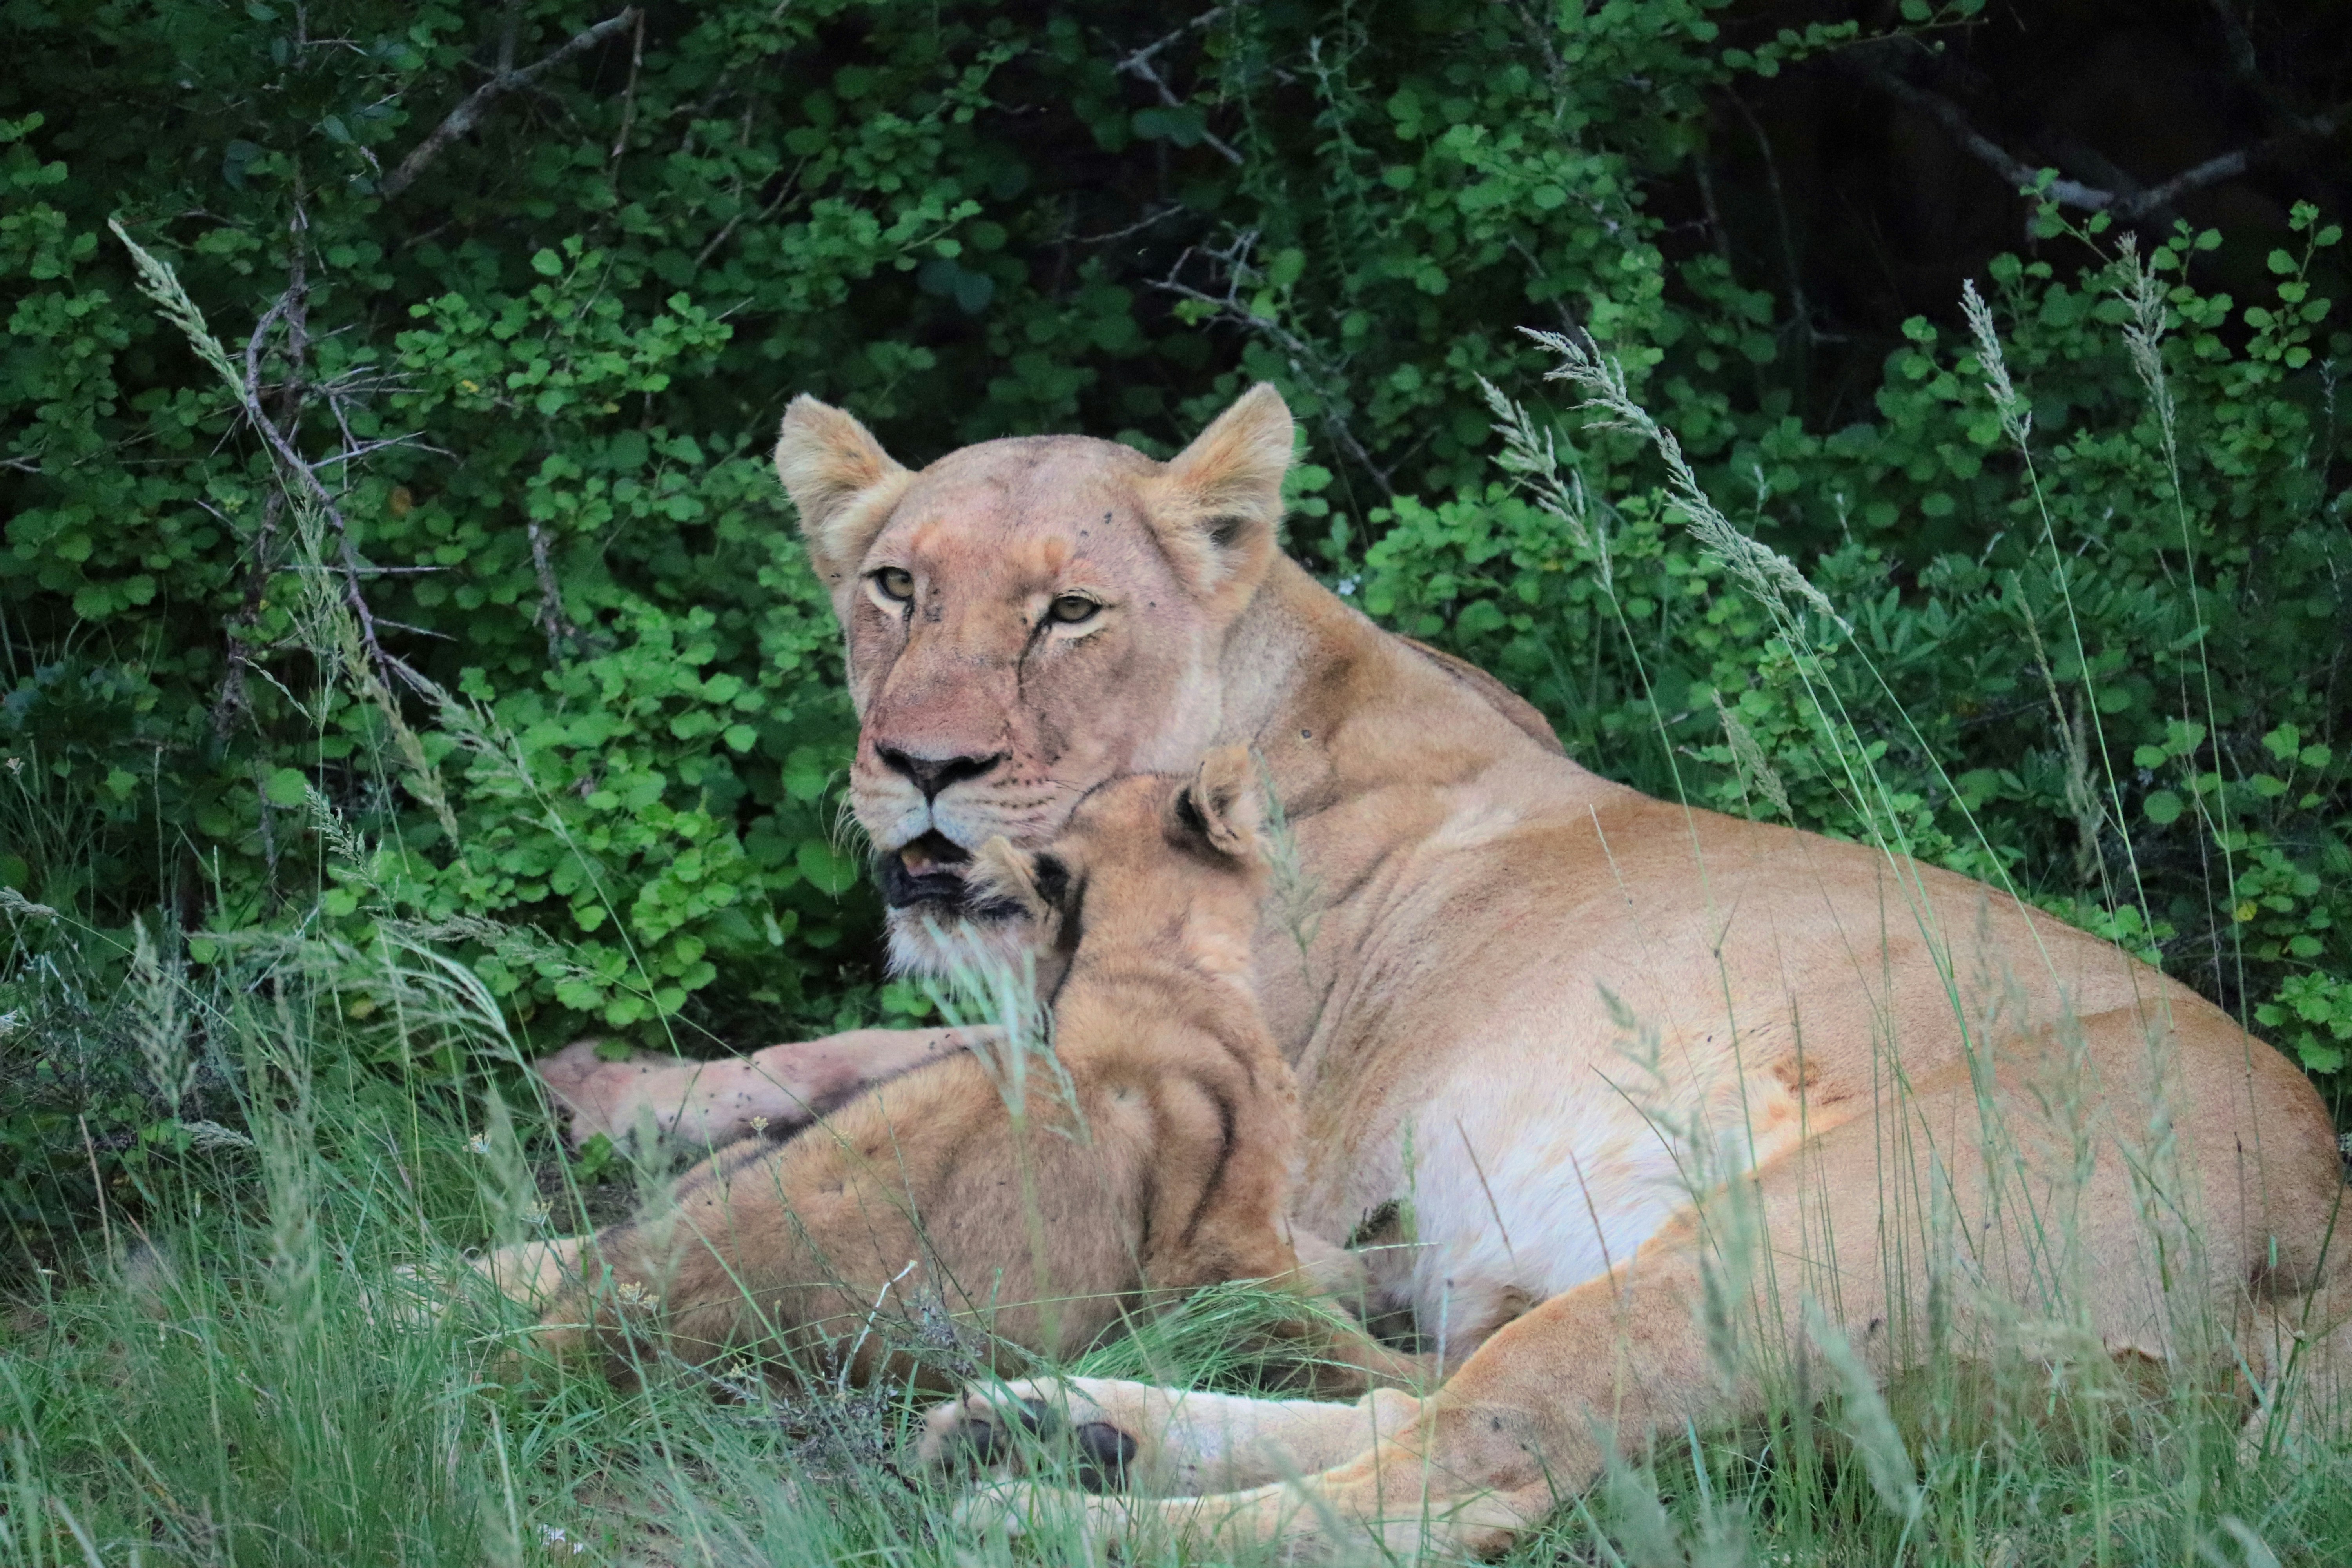 Lion cub snuggling with mom